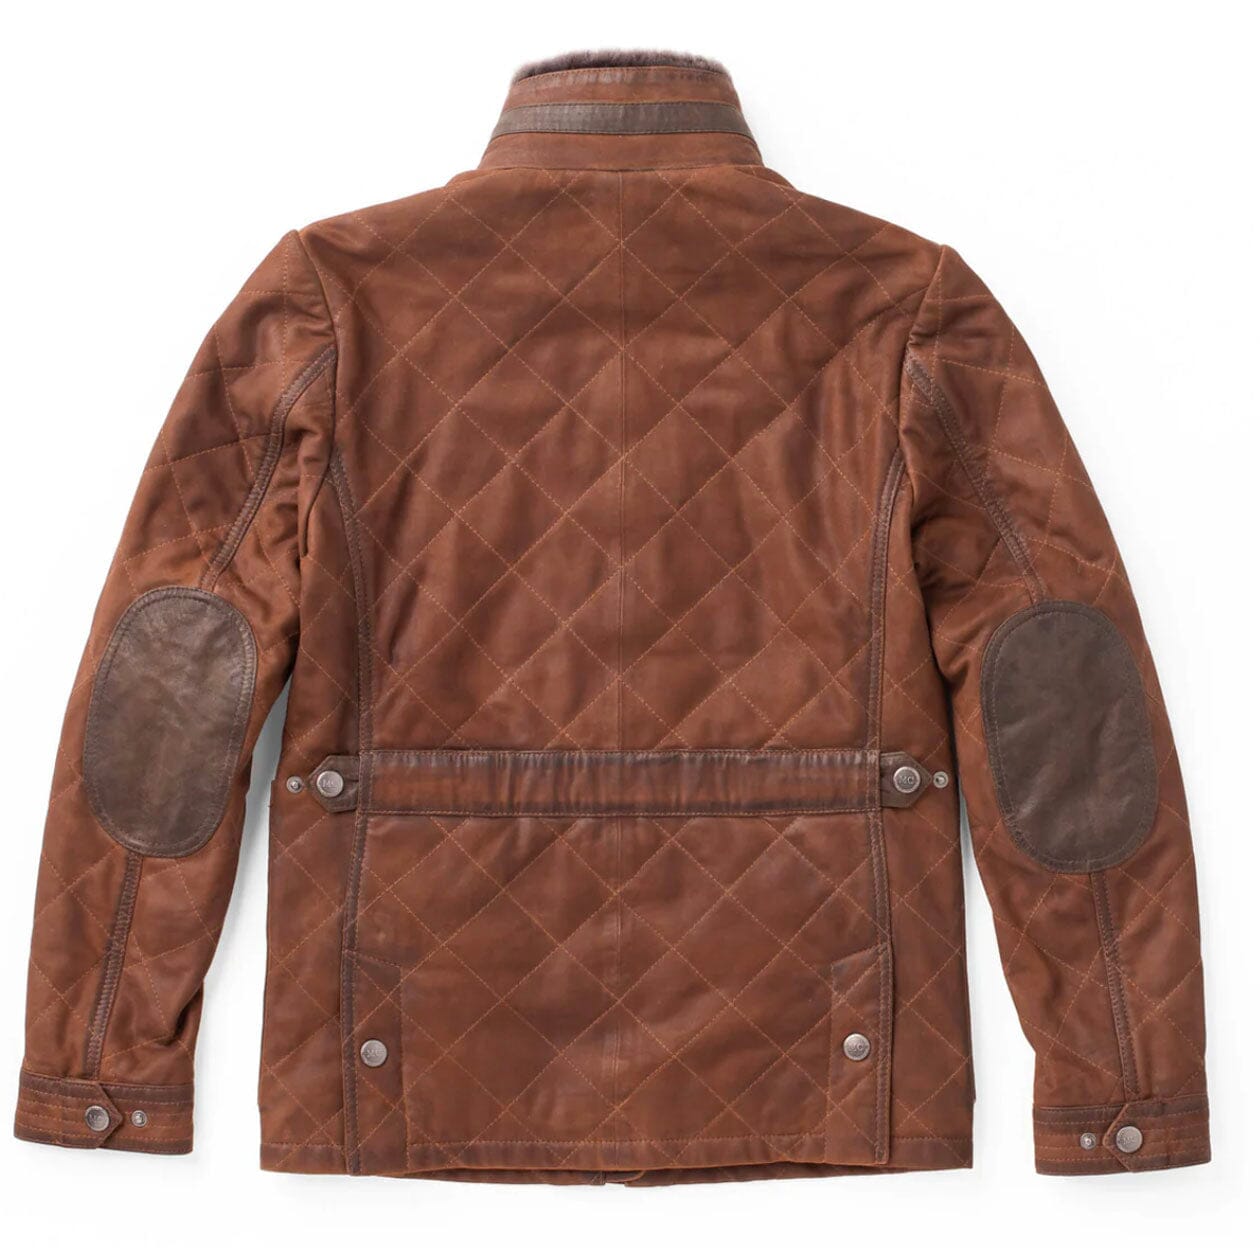 Wasatch Waxed Suede Leather Jacket - Madison Creek - JMC13